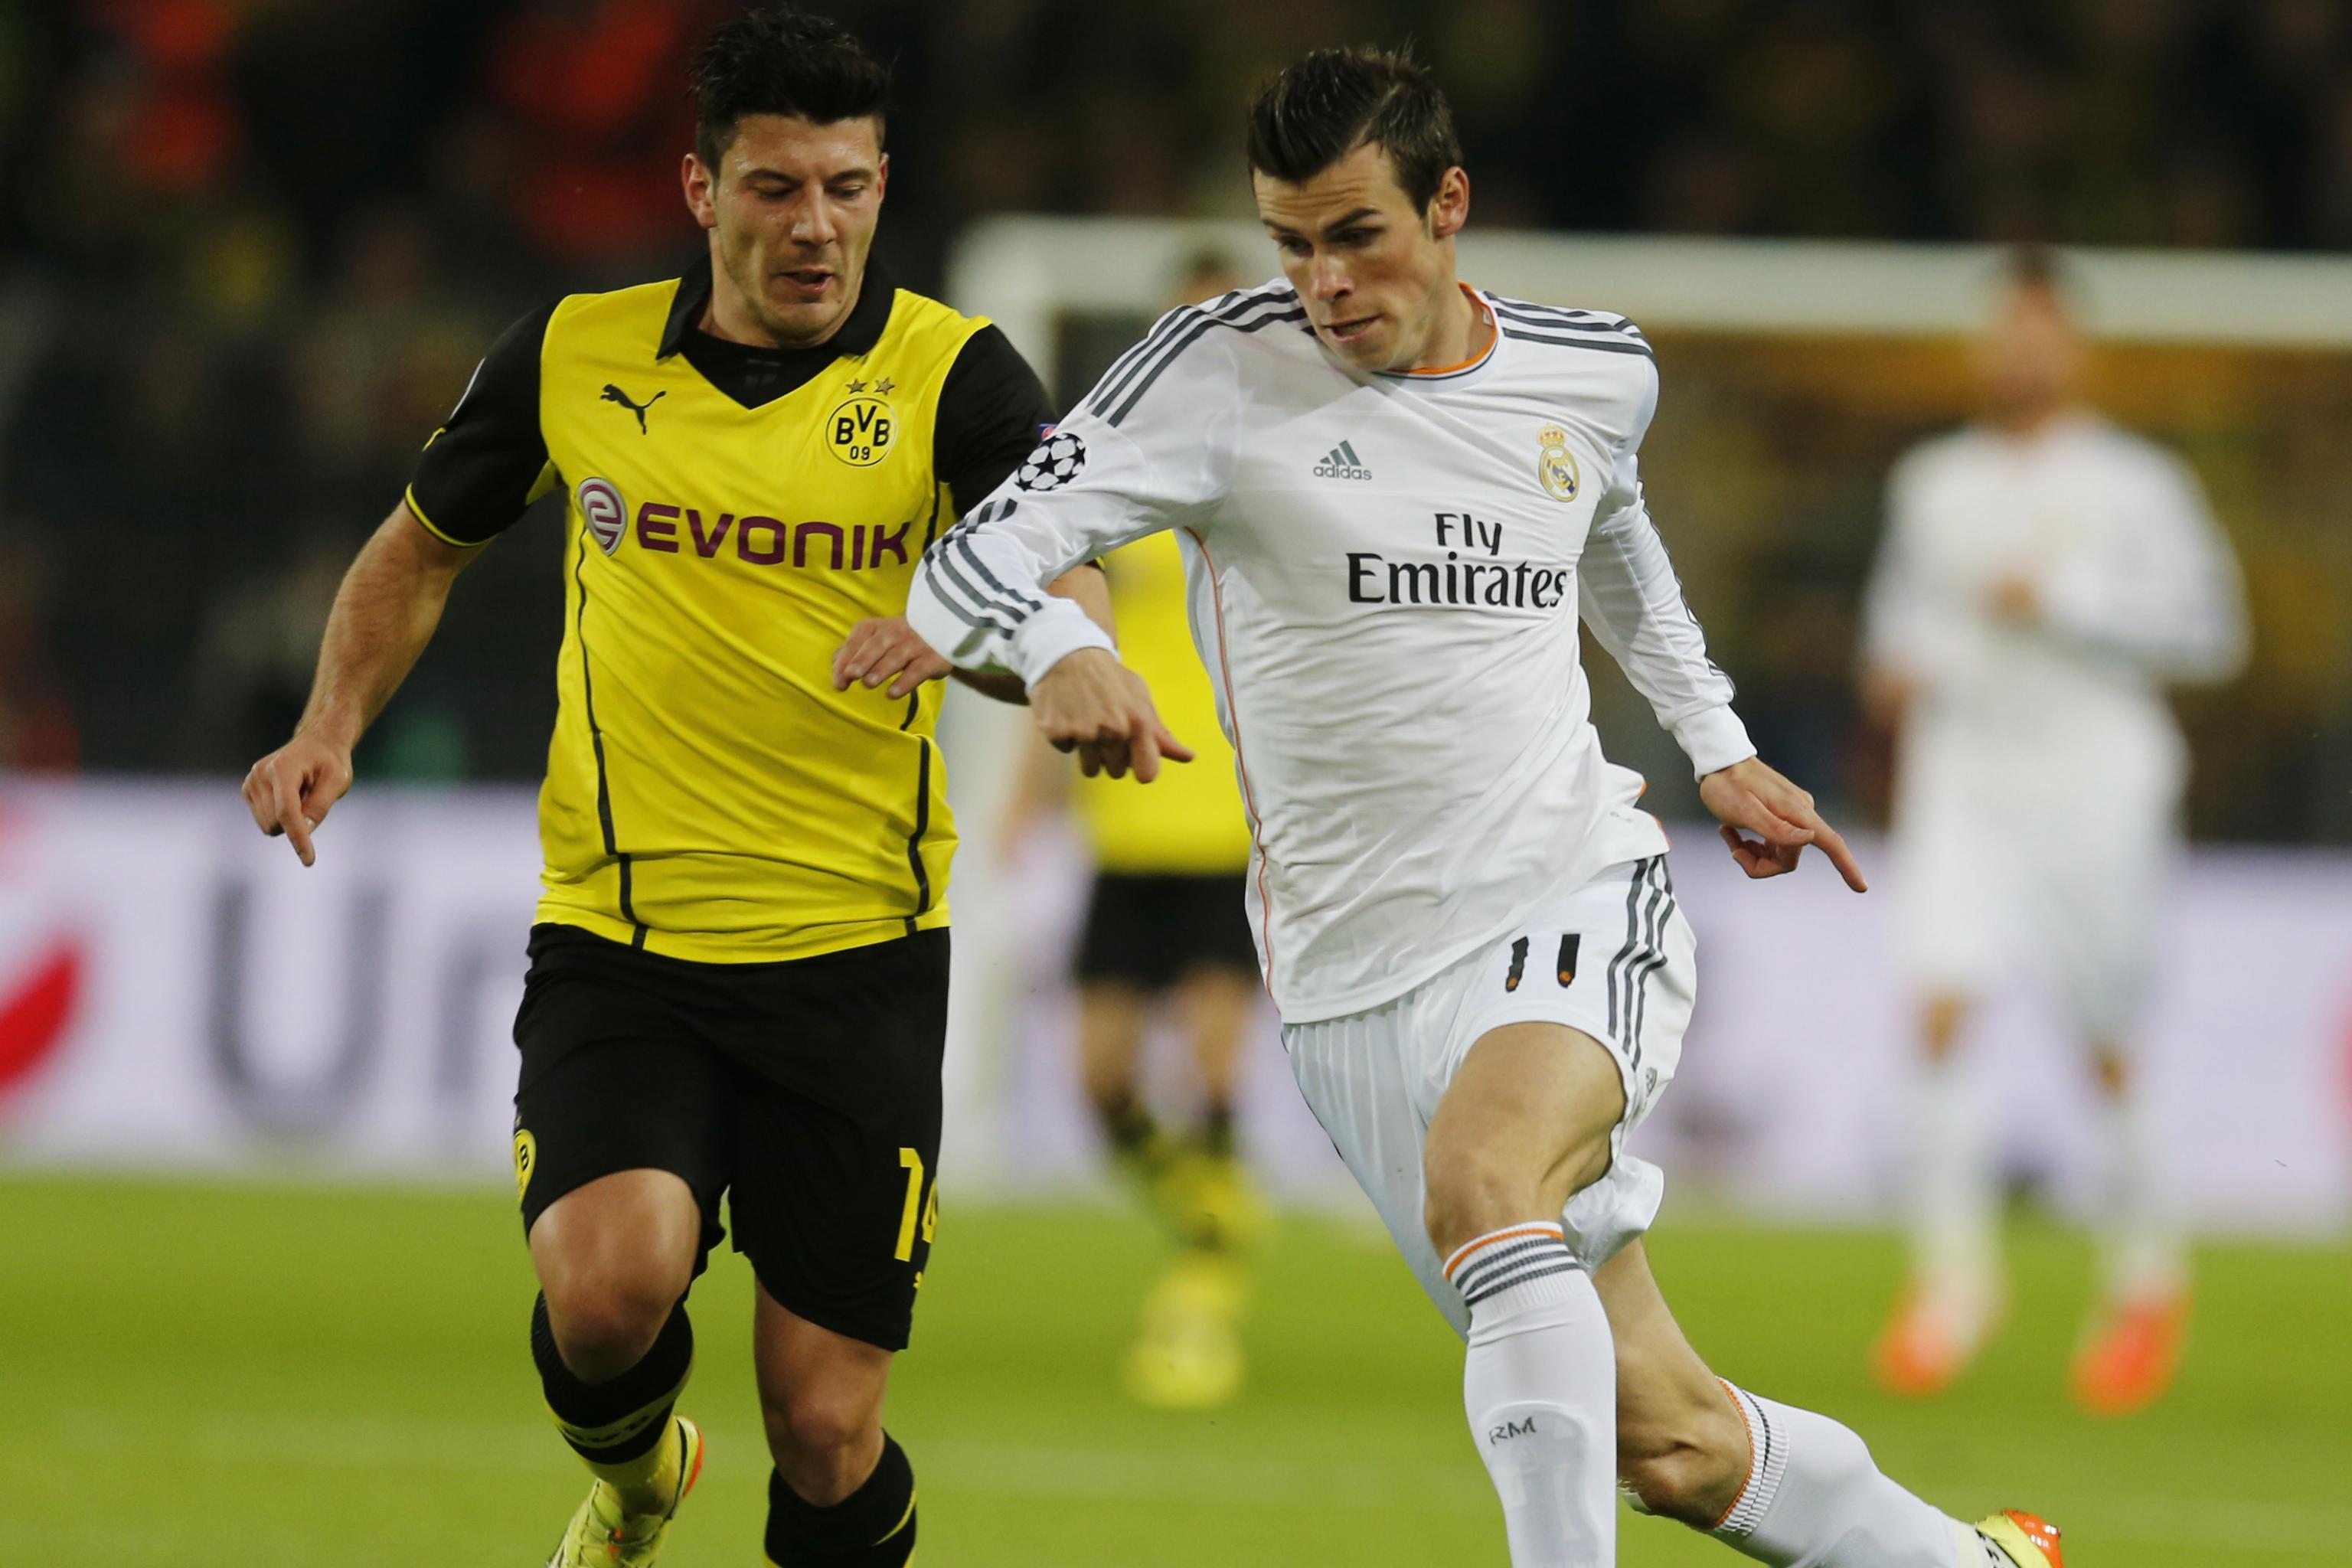 Gareth Bale Set to Cristiano Ronaldo, Lionel Messi with Giant Adidas Deal News, Scores, Highlights, Stats, and Rumors | Bleacher Report